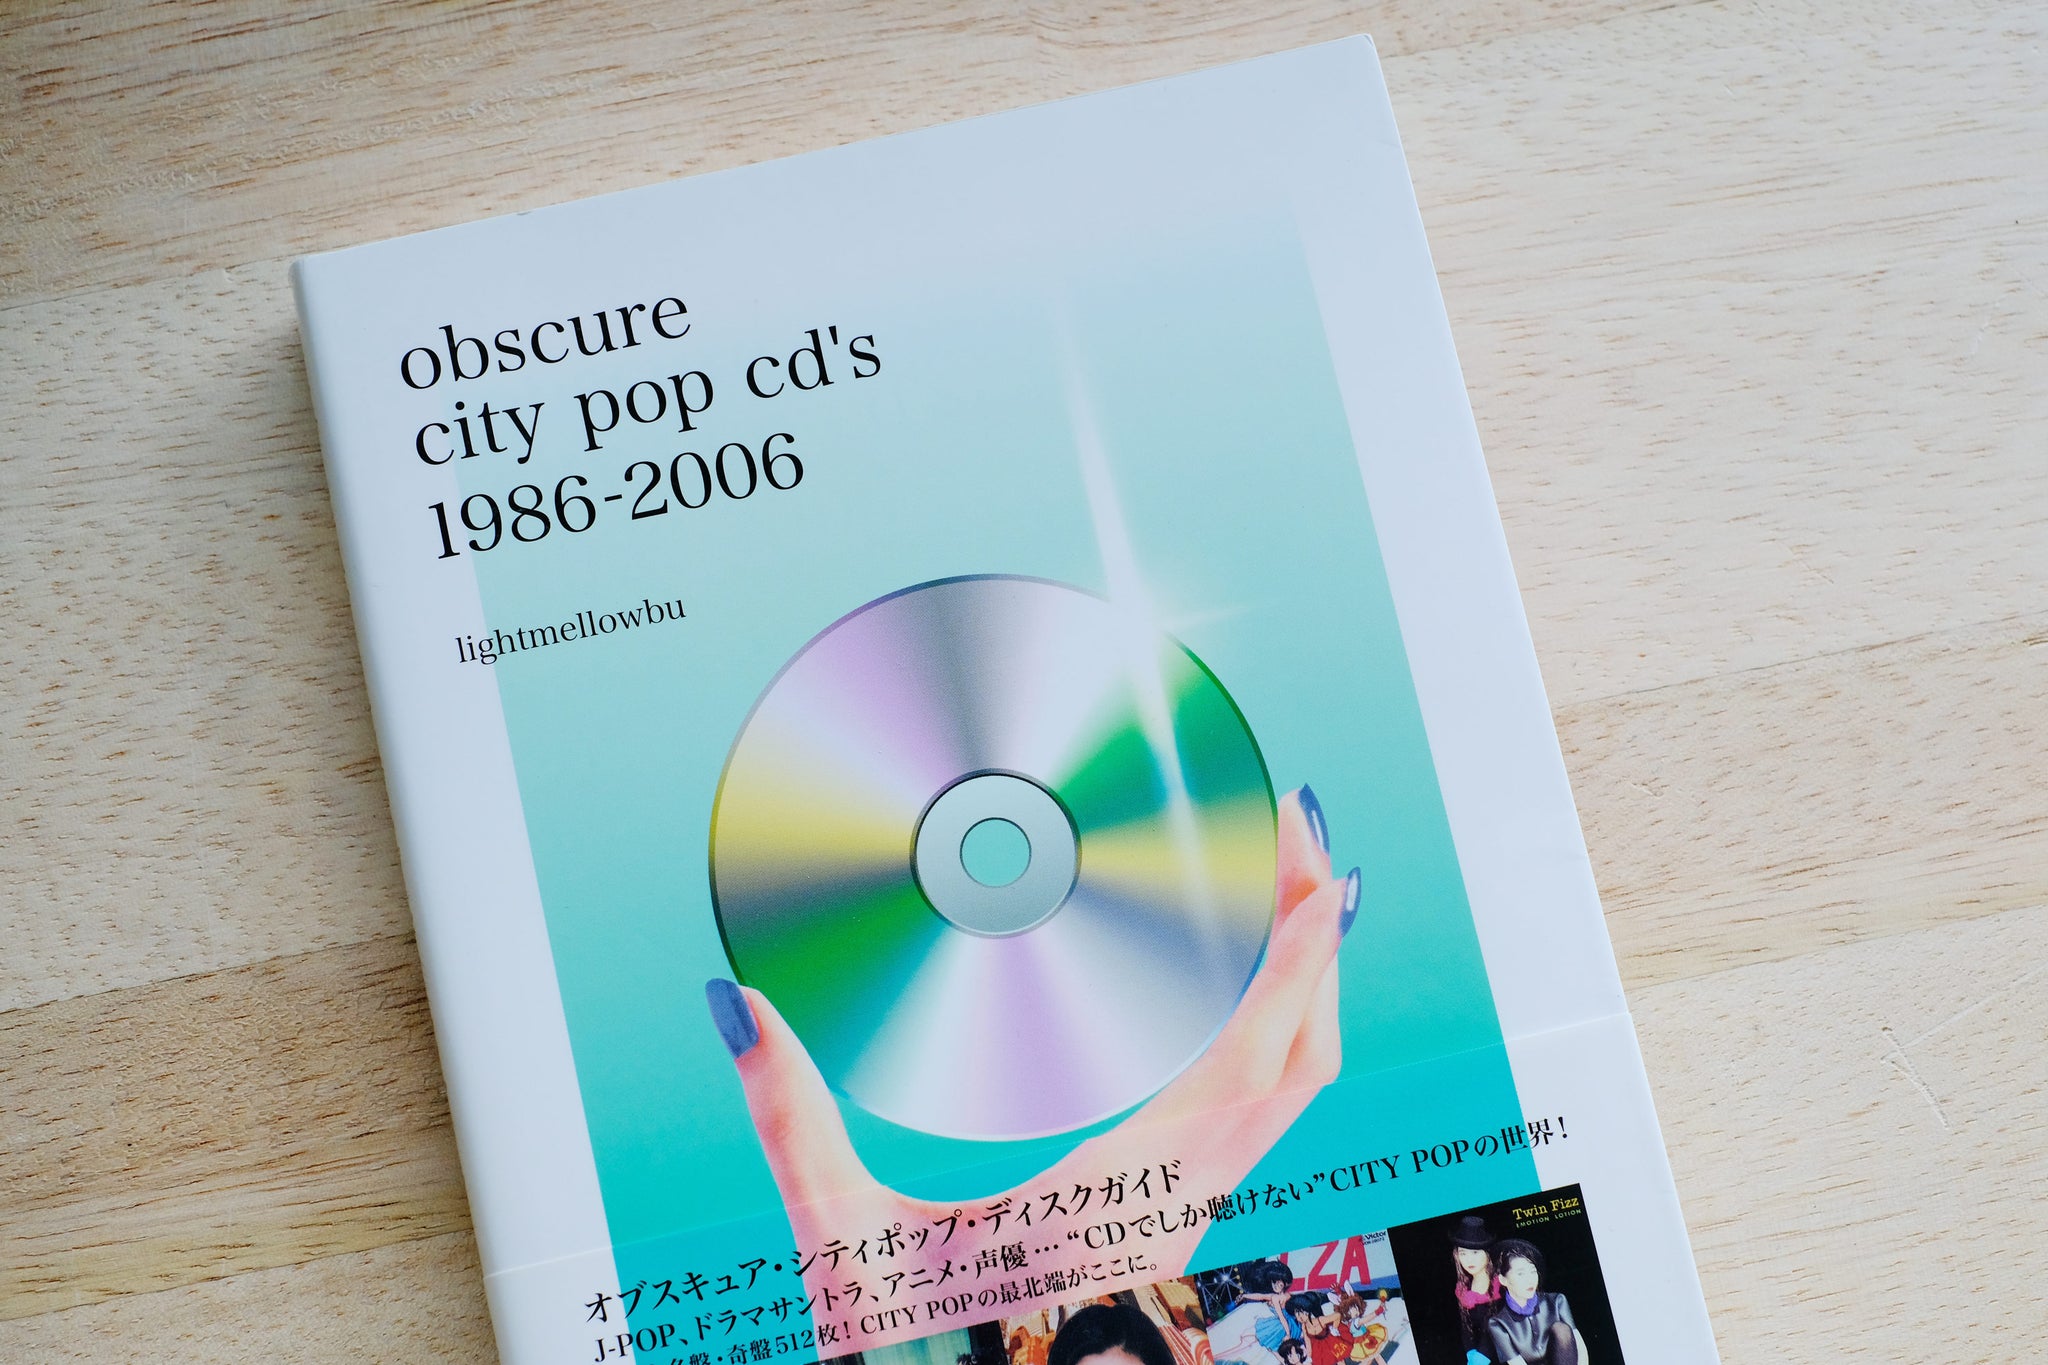 Obscure City Pop CD's 1986-2006 [Book]